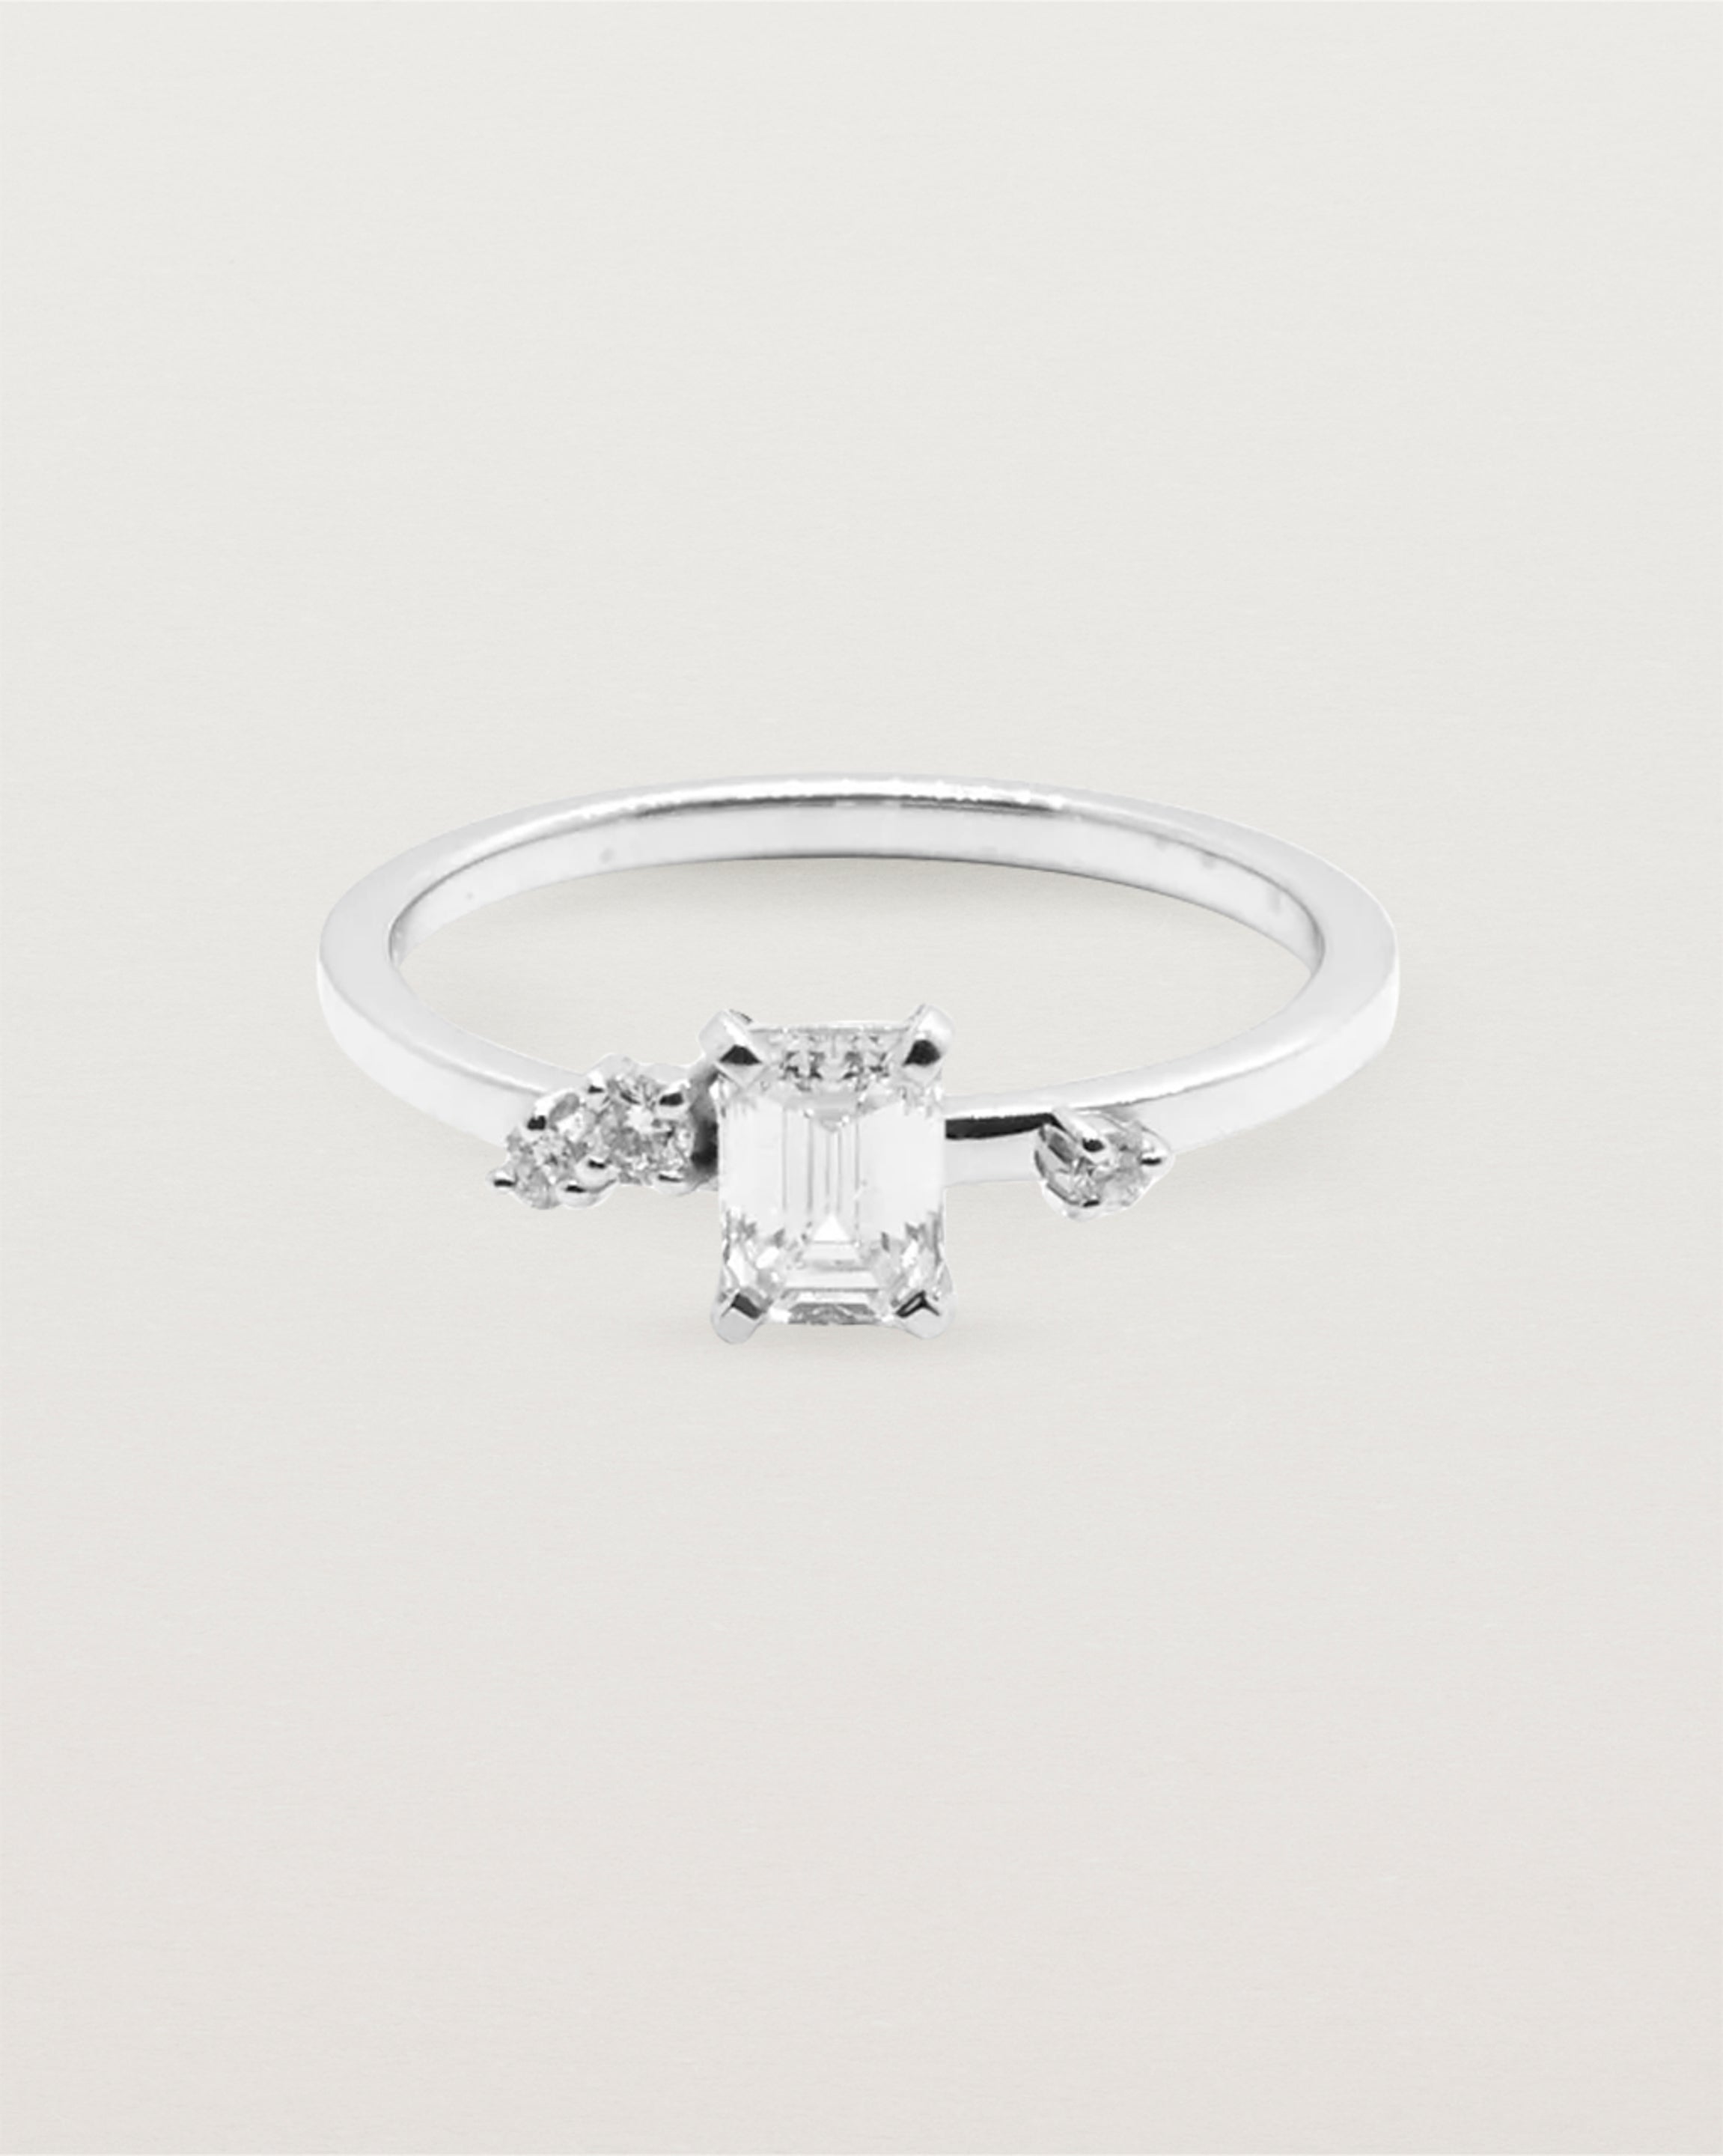 A petite emerald cut white diamond sits atop a square band with white diamond clusters either side, crafted in white gold.